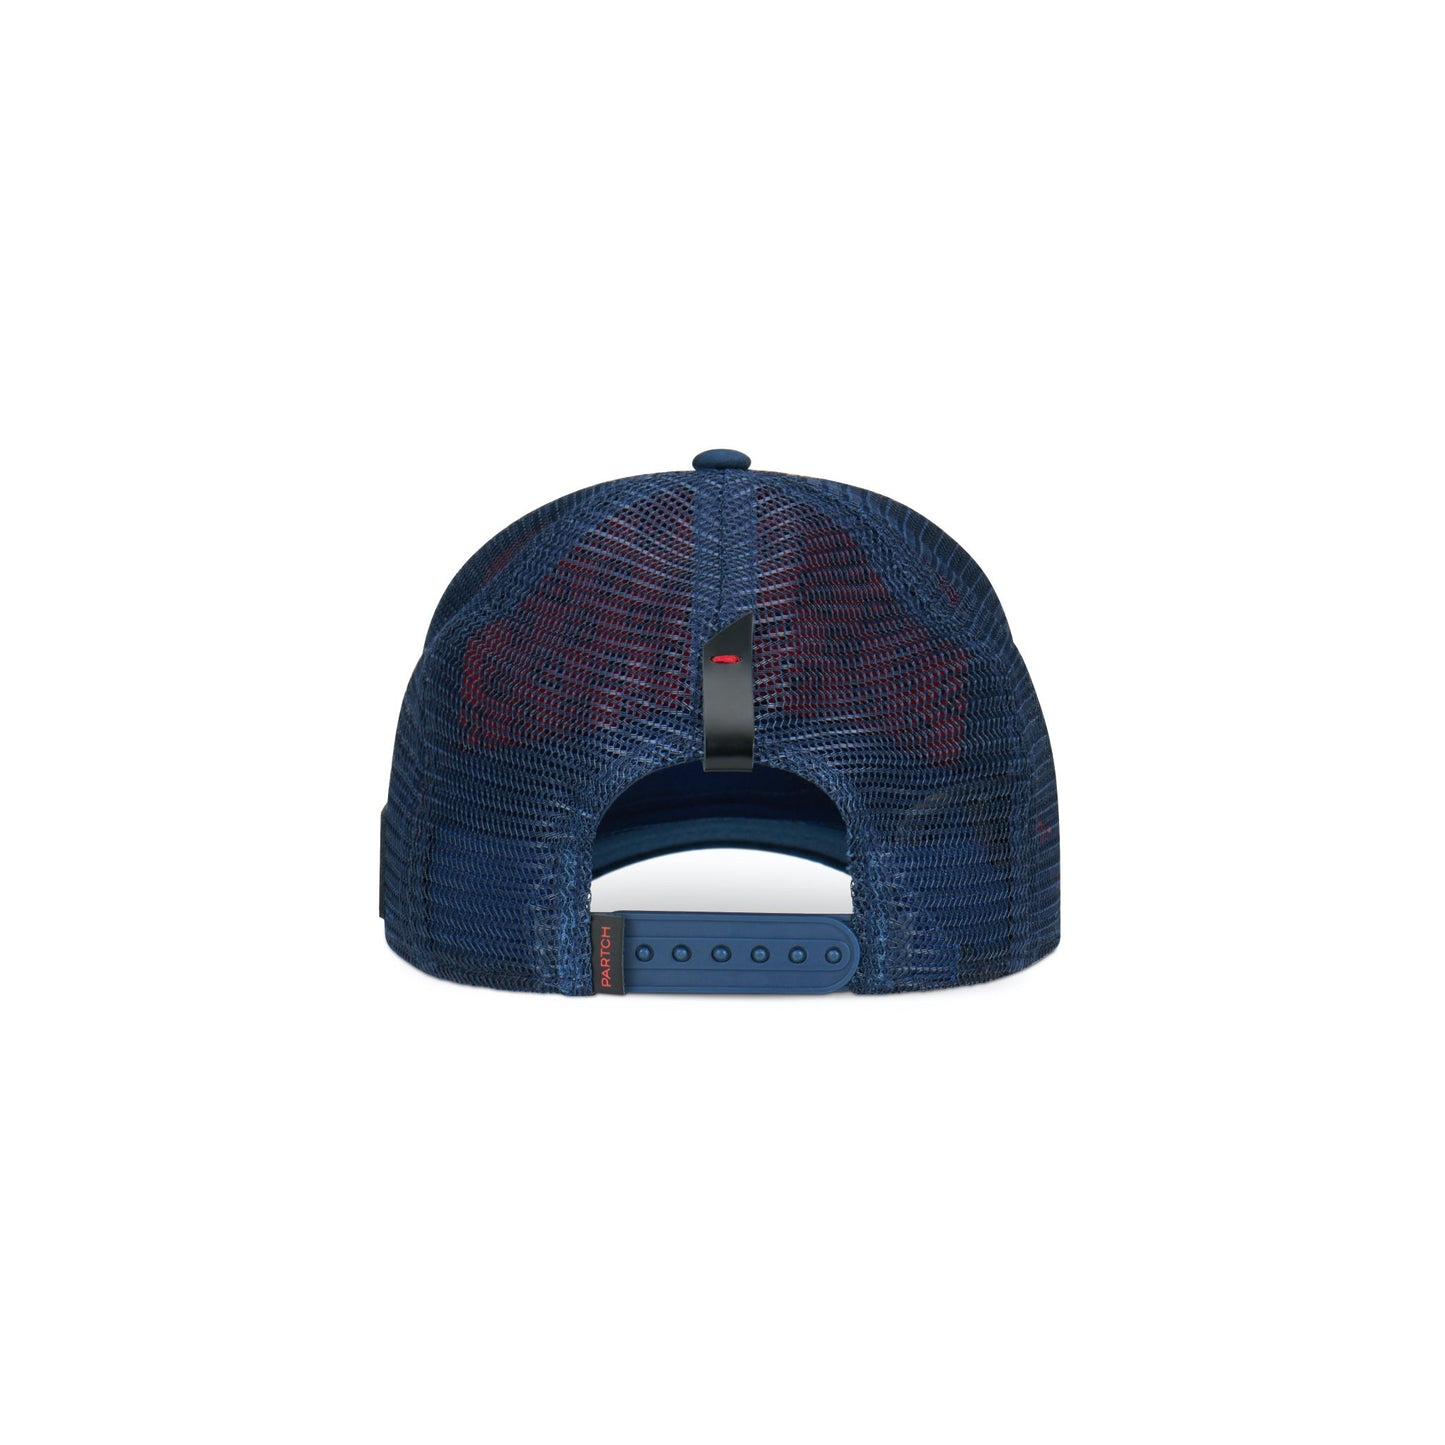 Partch Trucker Hat Navy Blue with PARTCH-Clip Dulxy Back View